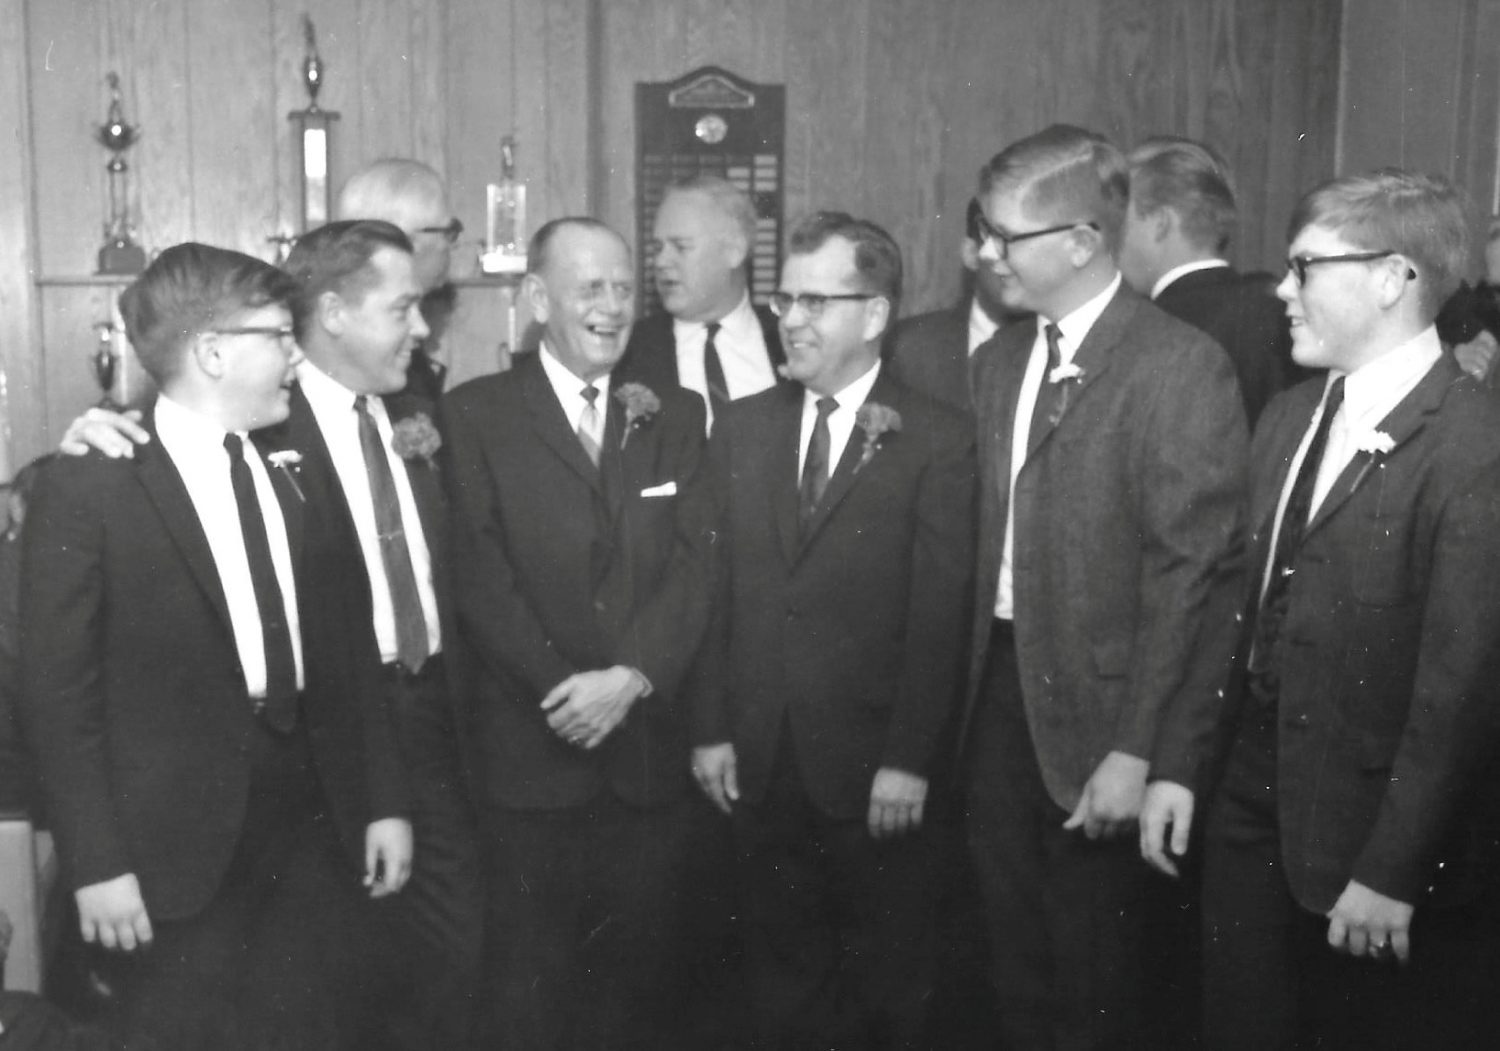 Harry C. Wenzel, who would carry on the Wenzel’s Farm legacy after his father’s, William’s, passing, is surrounded by his sons and grandsons. Pictured (from left) are Steve, William F., Harry C., Harry J., Russ, and Bill Wenzel.